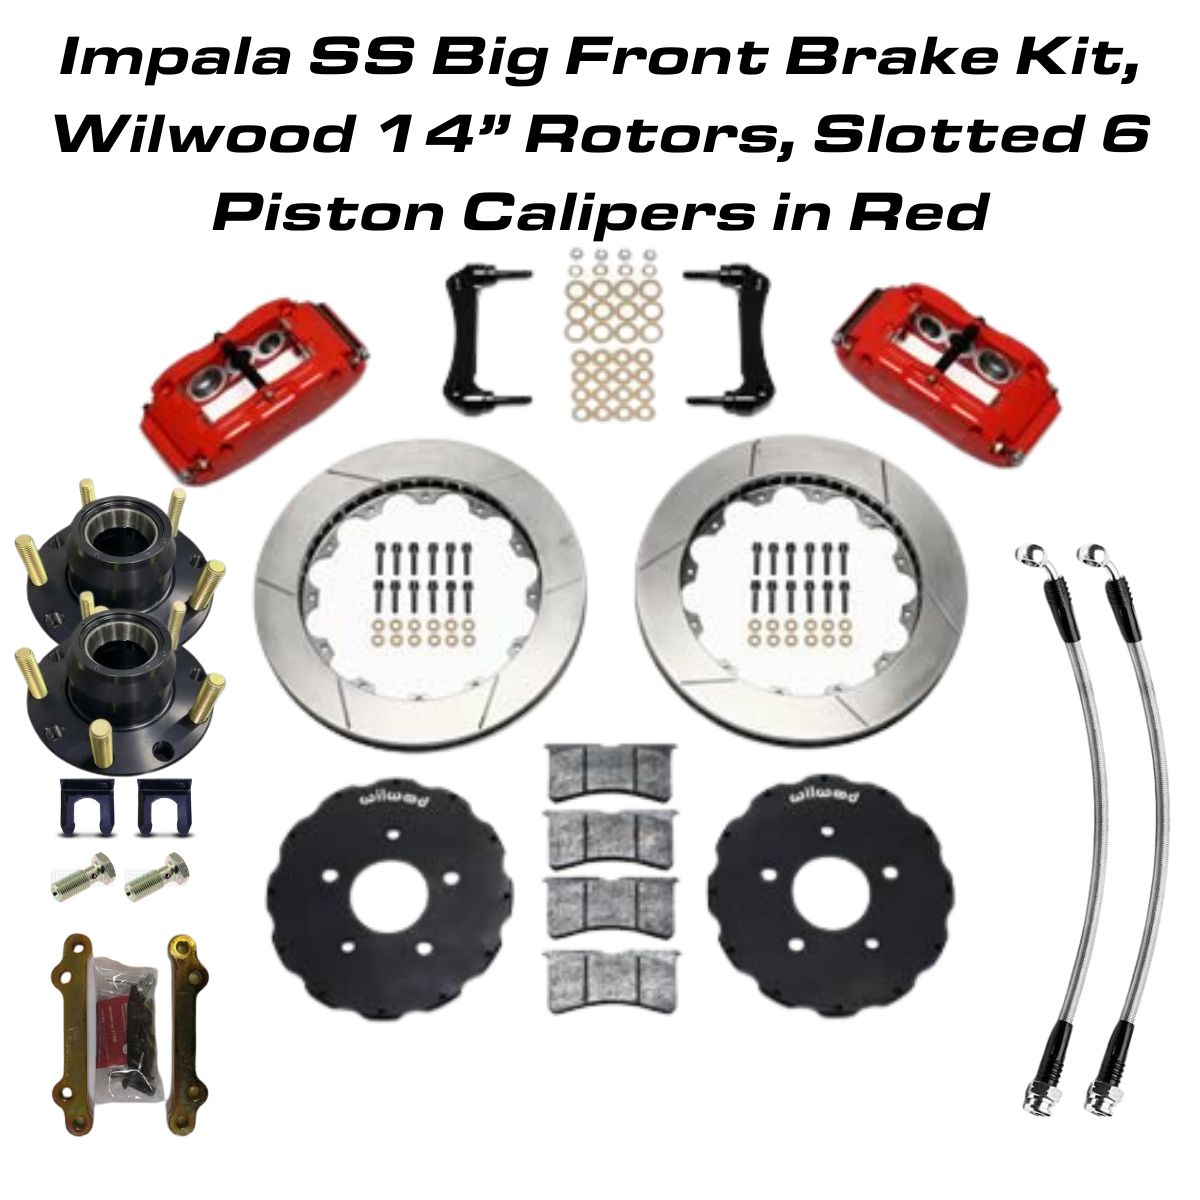 Impala SS Big Front Brake Kit, 14 Inch Wilwood Rotors, 6 Piston Forged Calipers - Slotted, Red Calipers